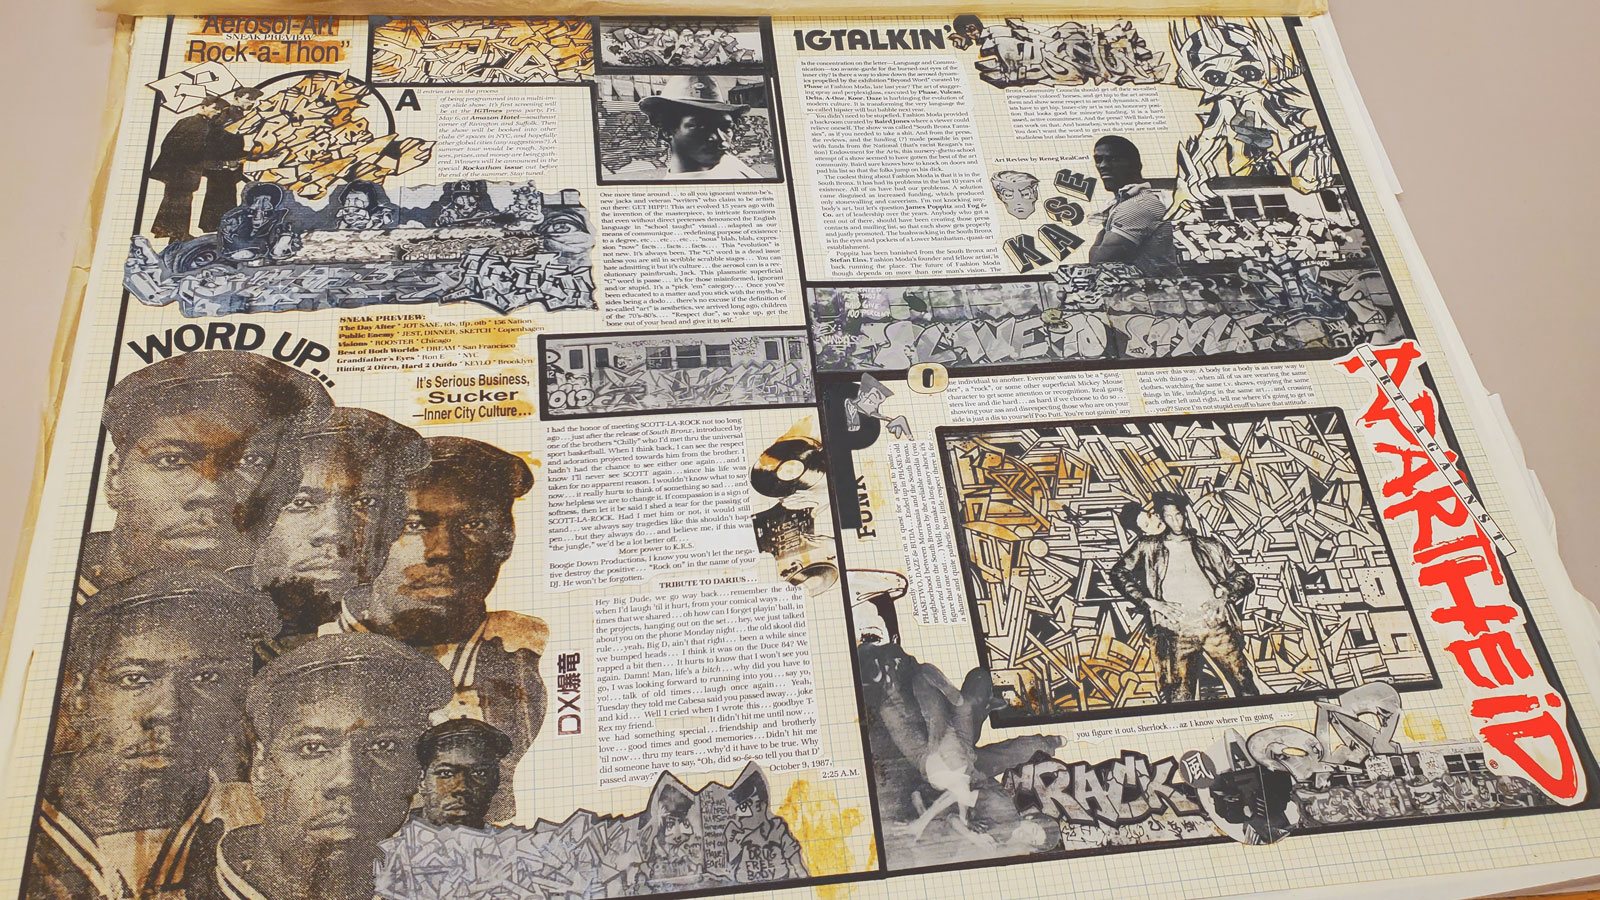 Collaged pages that were part of an edition of the International Graffiti Times (IGT) by Phase 2, circa 1987.